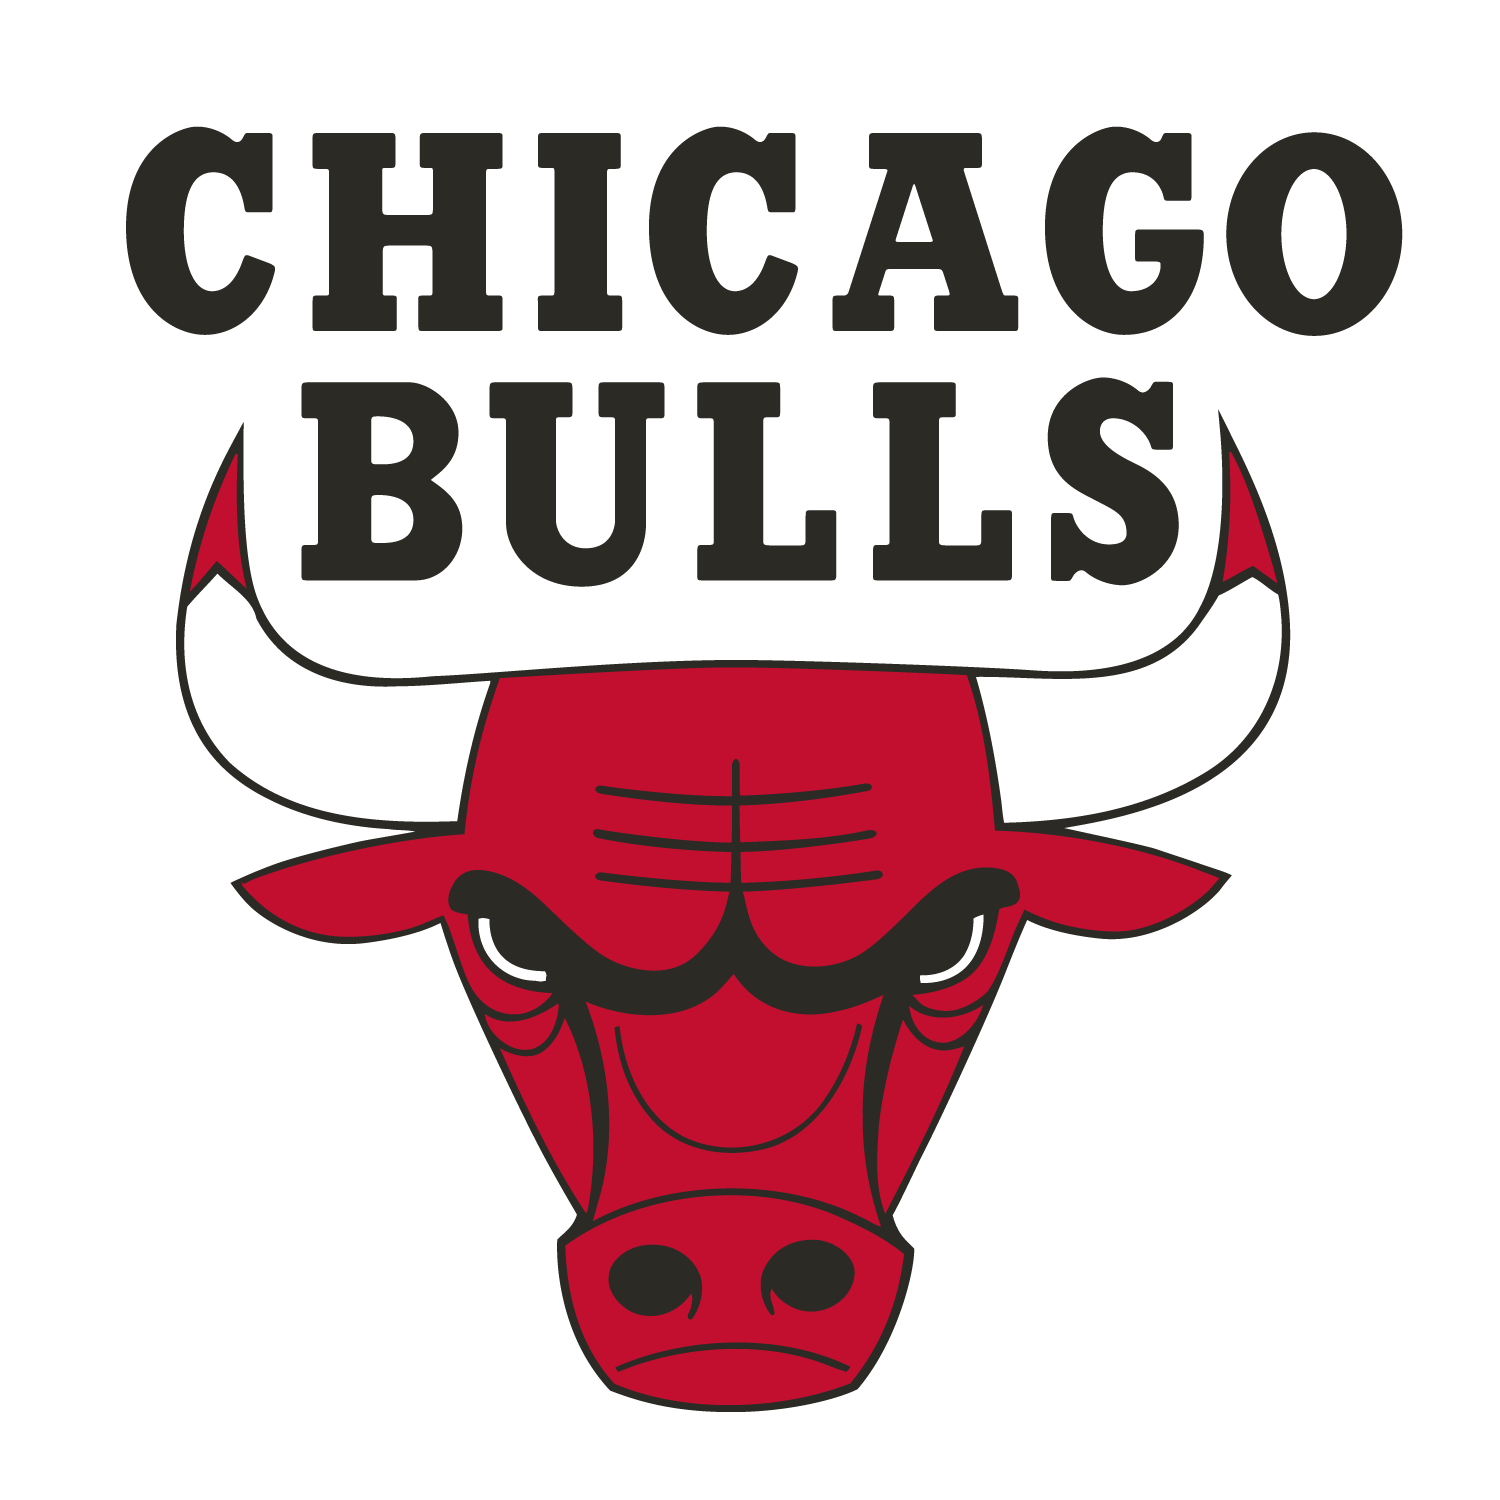 Shop Chicago Bulls products